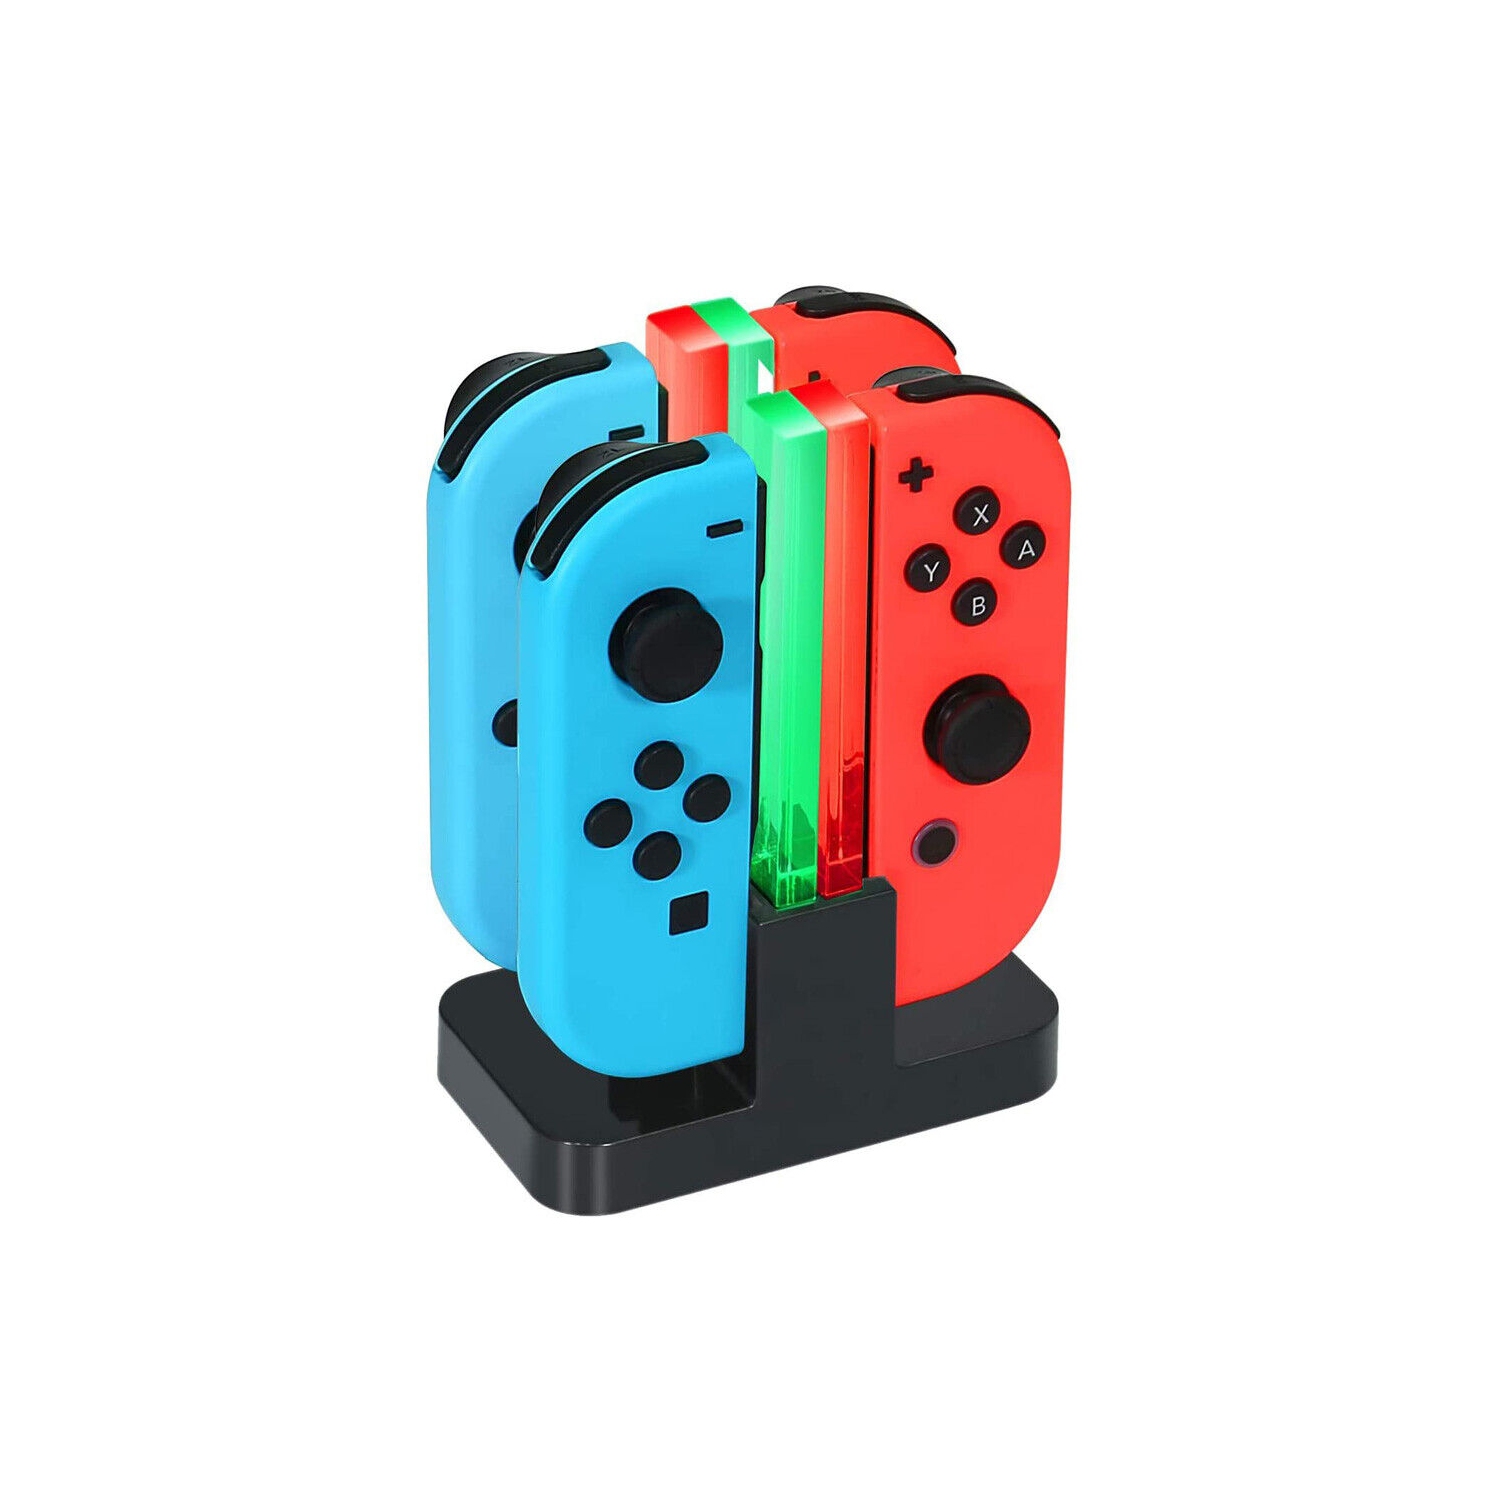 Simplify Your Gaming Setup with a Charging Dock Stand Station for Nintendo Switch Controllers – Joy-Con Charger Included